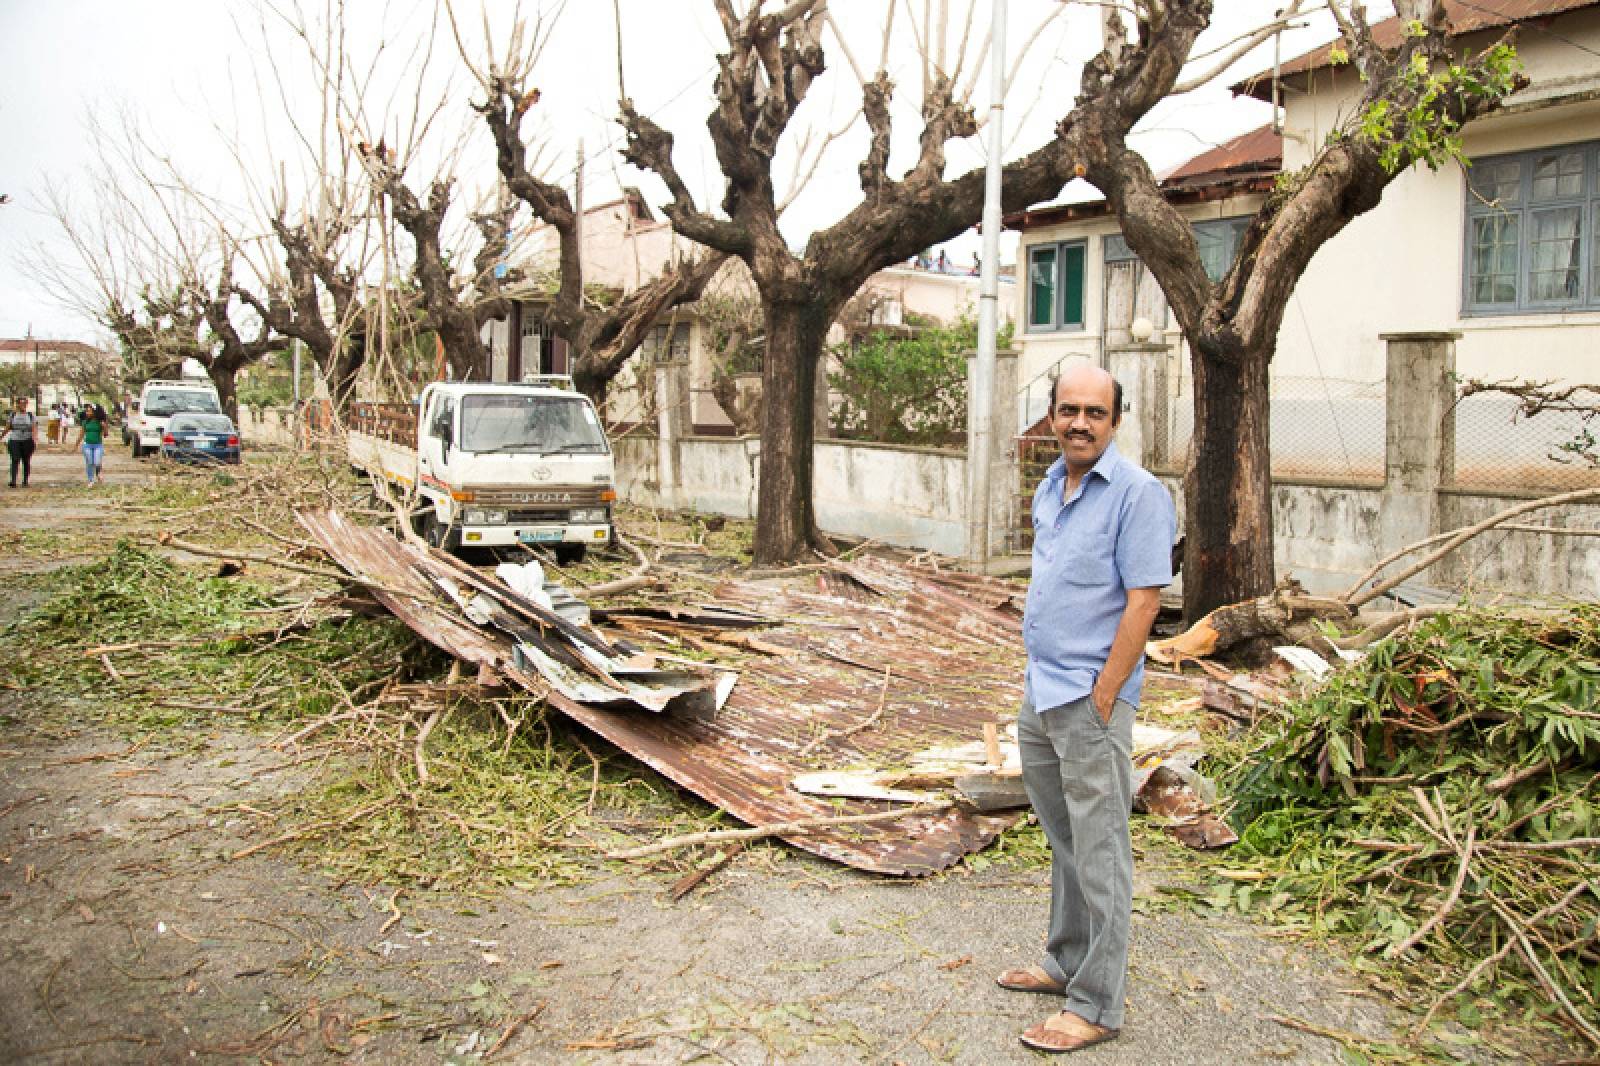 Damage from the Cyclone Idai is seen in Beira